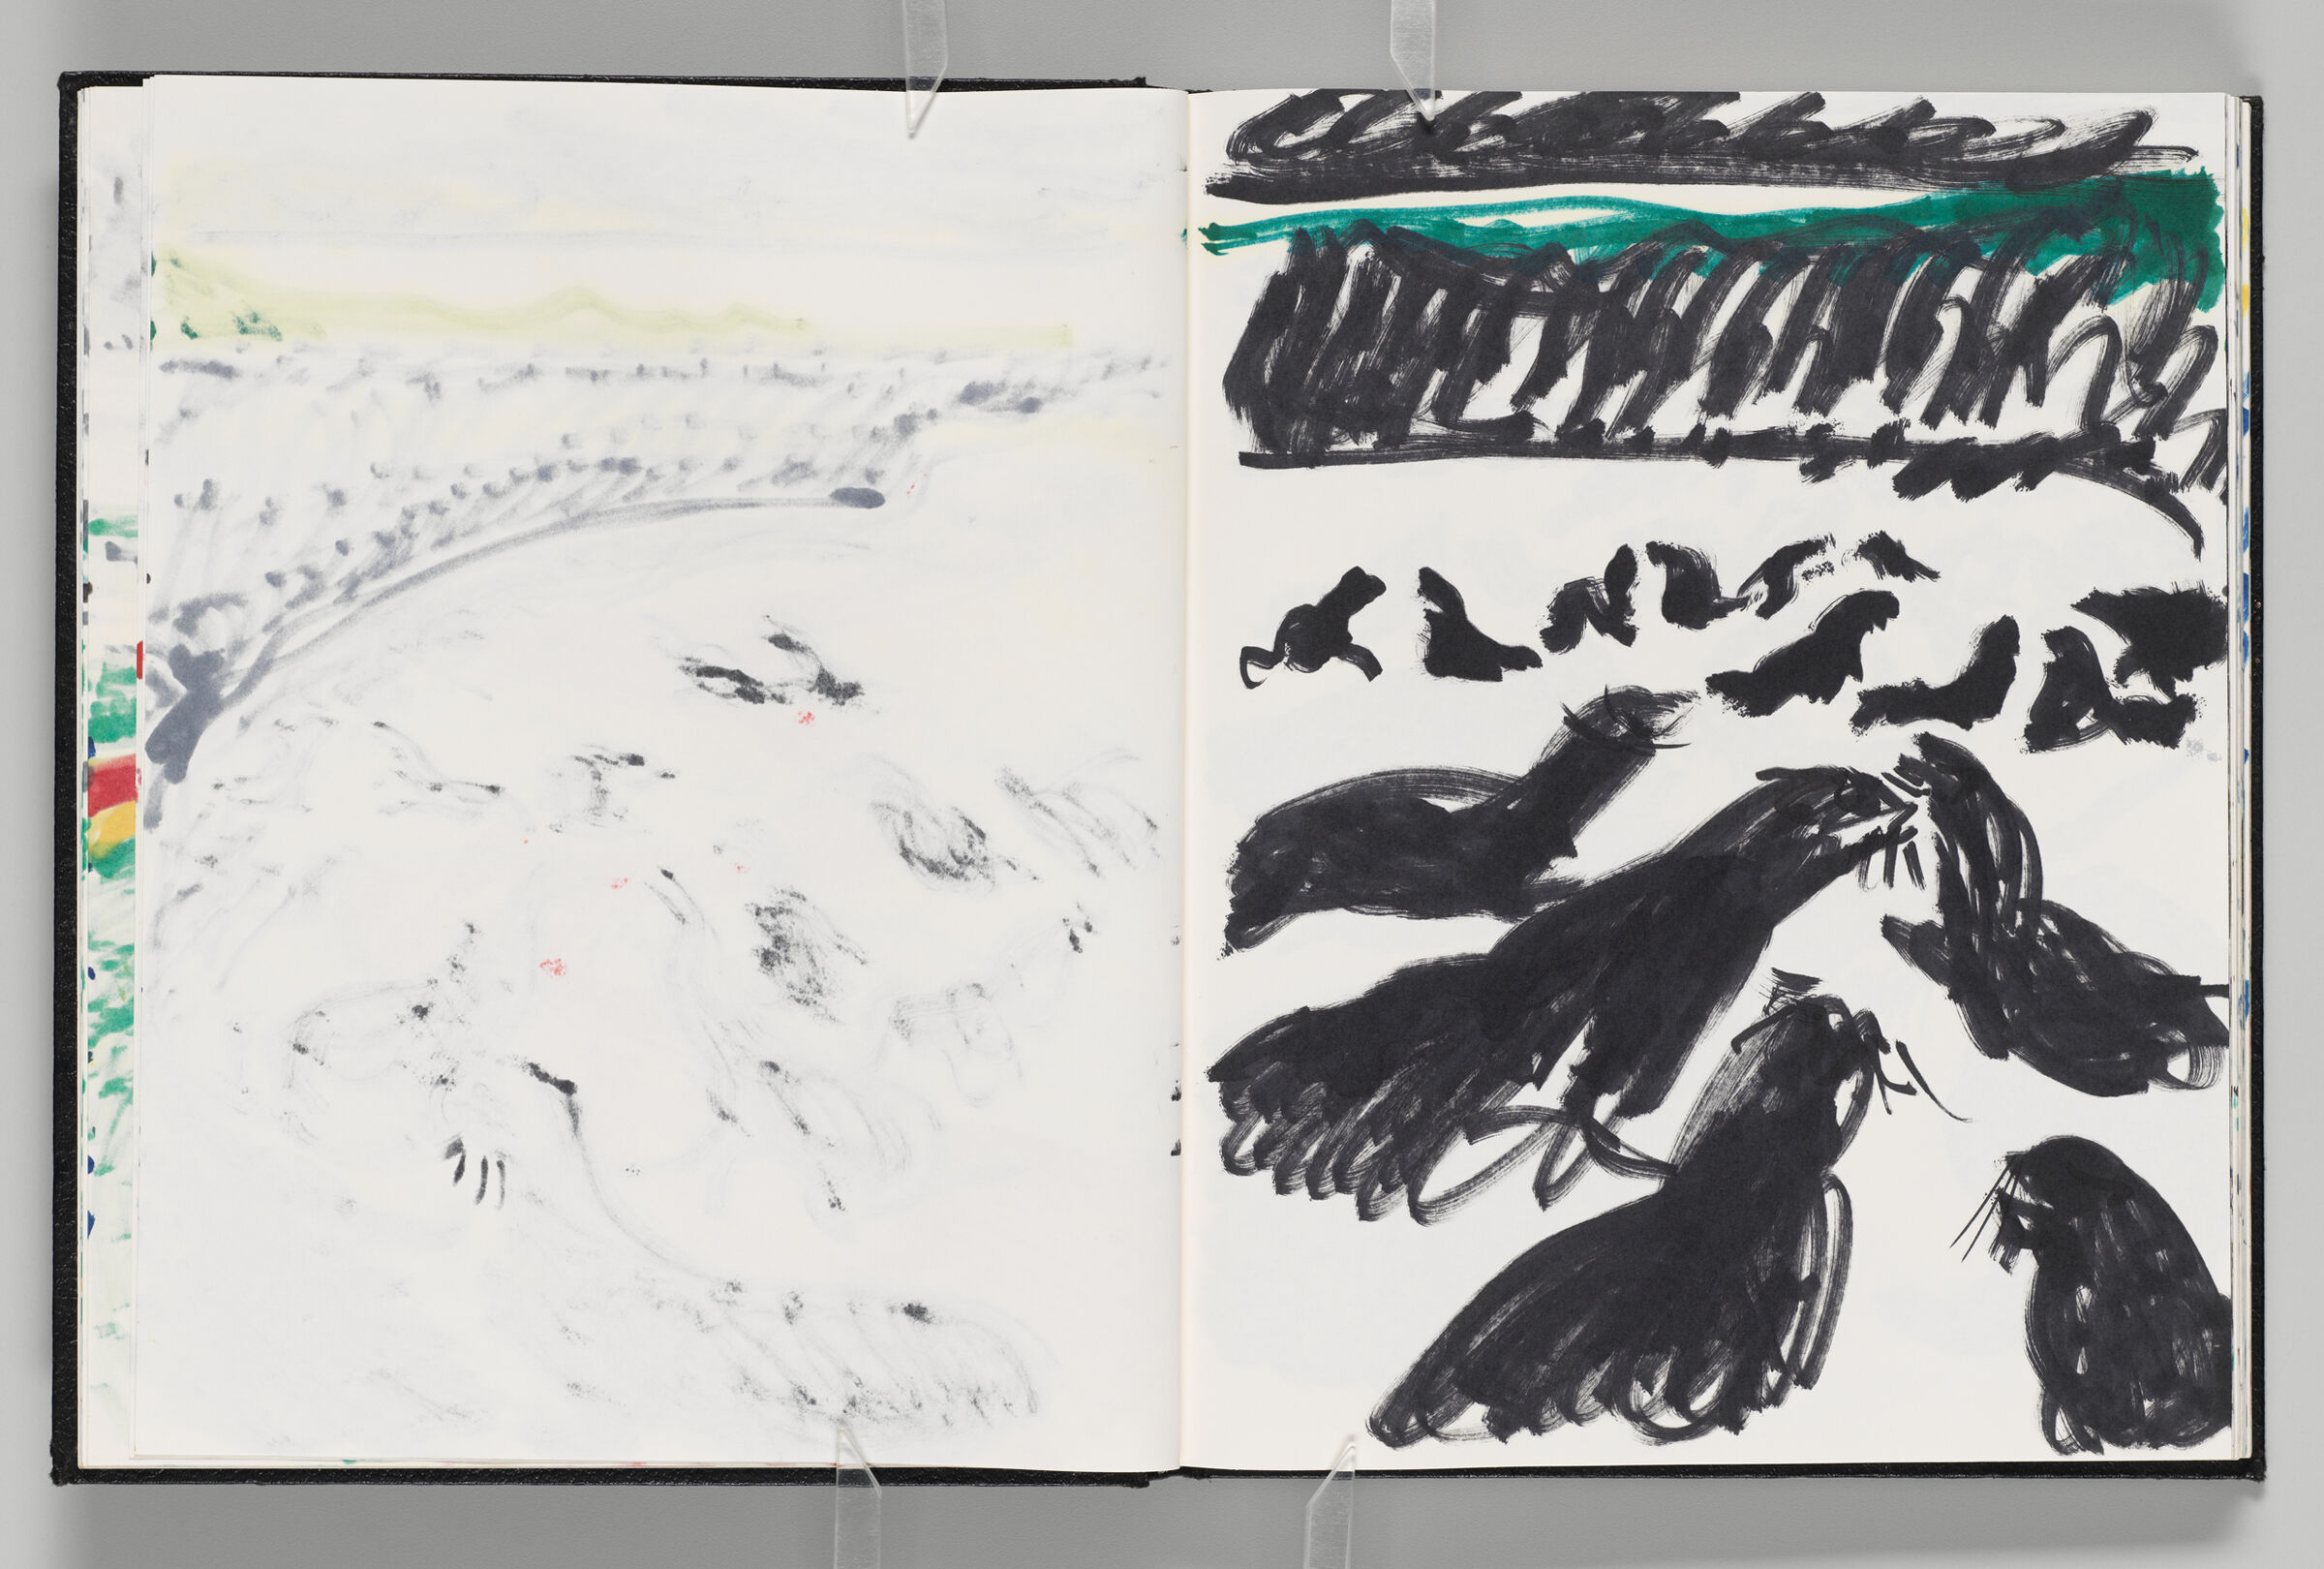 Untitled (Bleed-Through Of Previous Page, Left Page); Untitled (Seals In Landscape, Right Page)